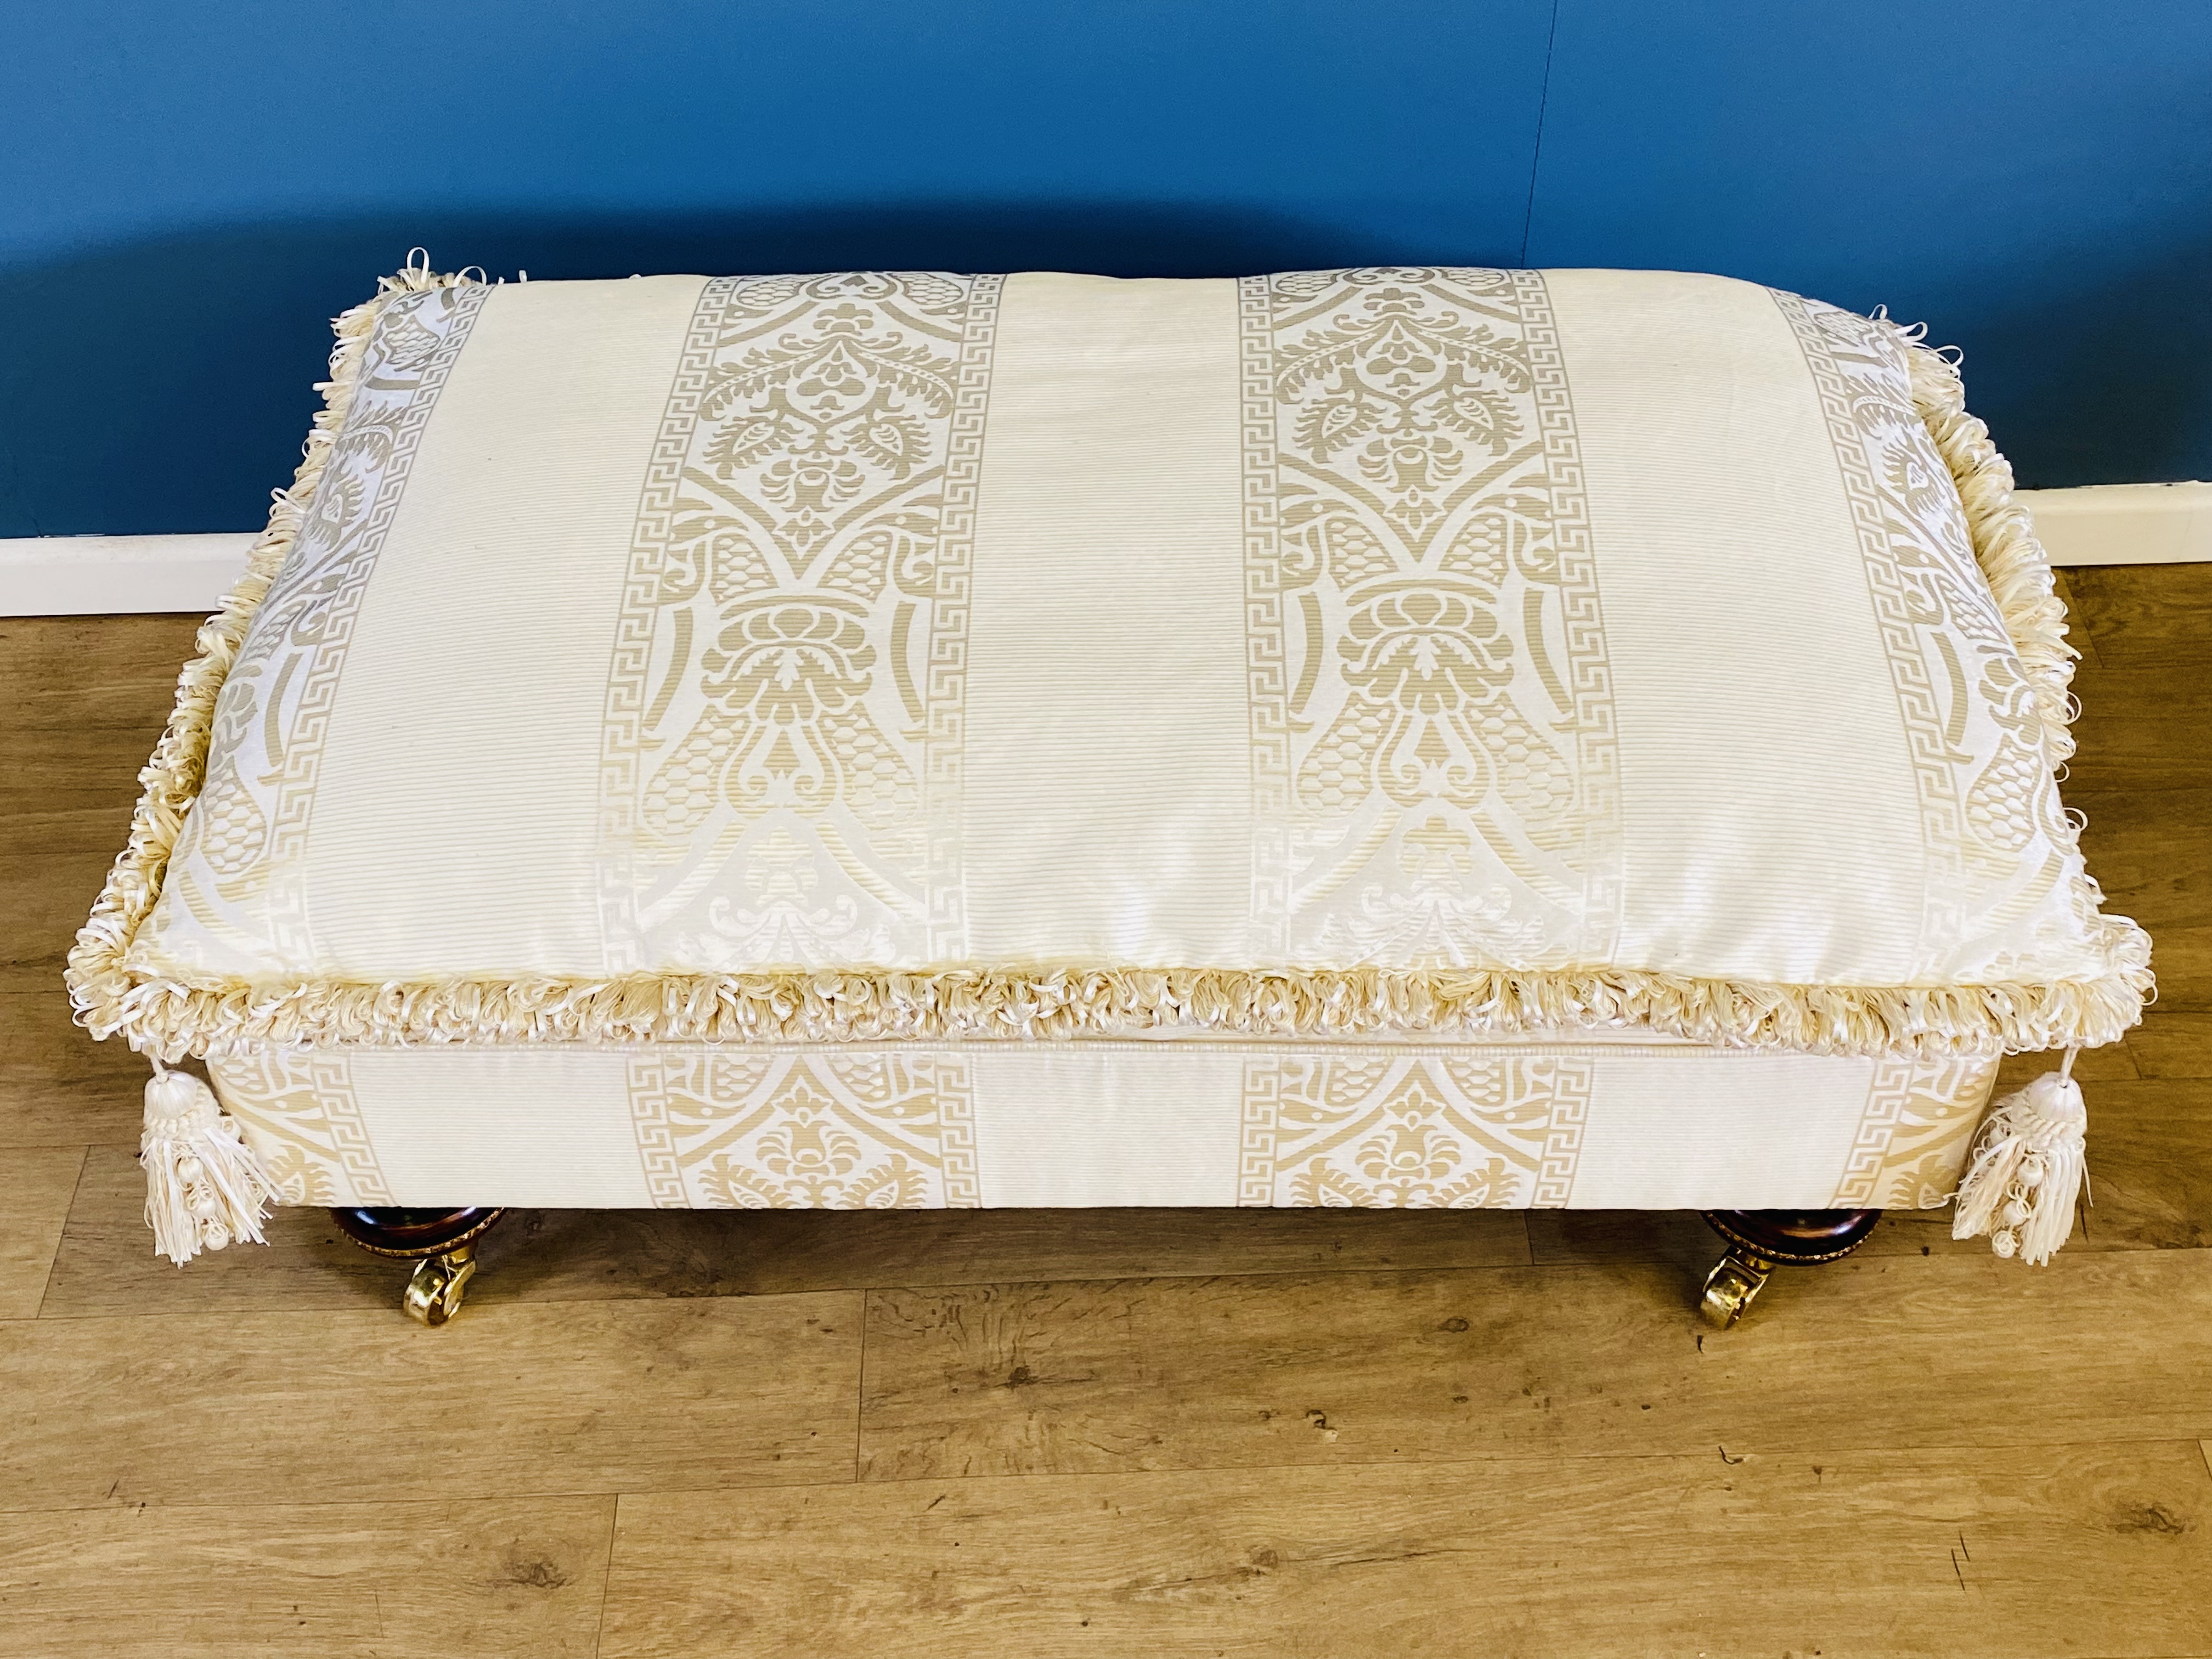 Contemporary footstool to match sofas - Image 2 of 3